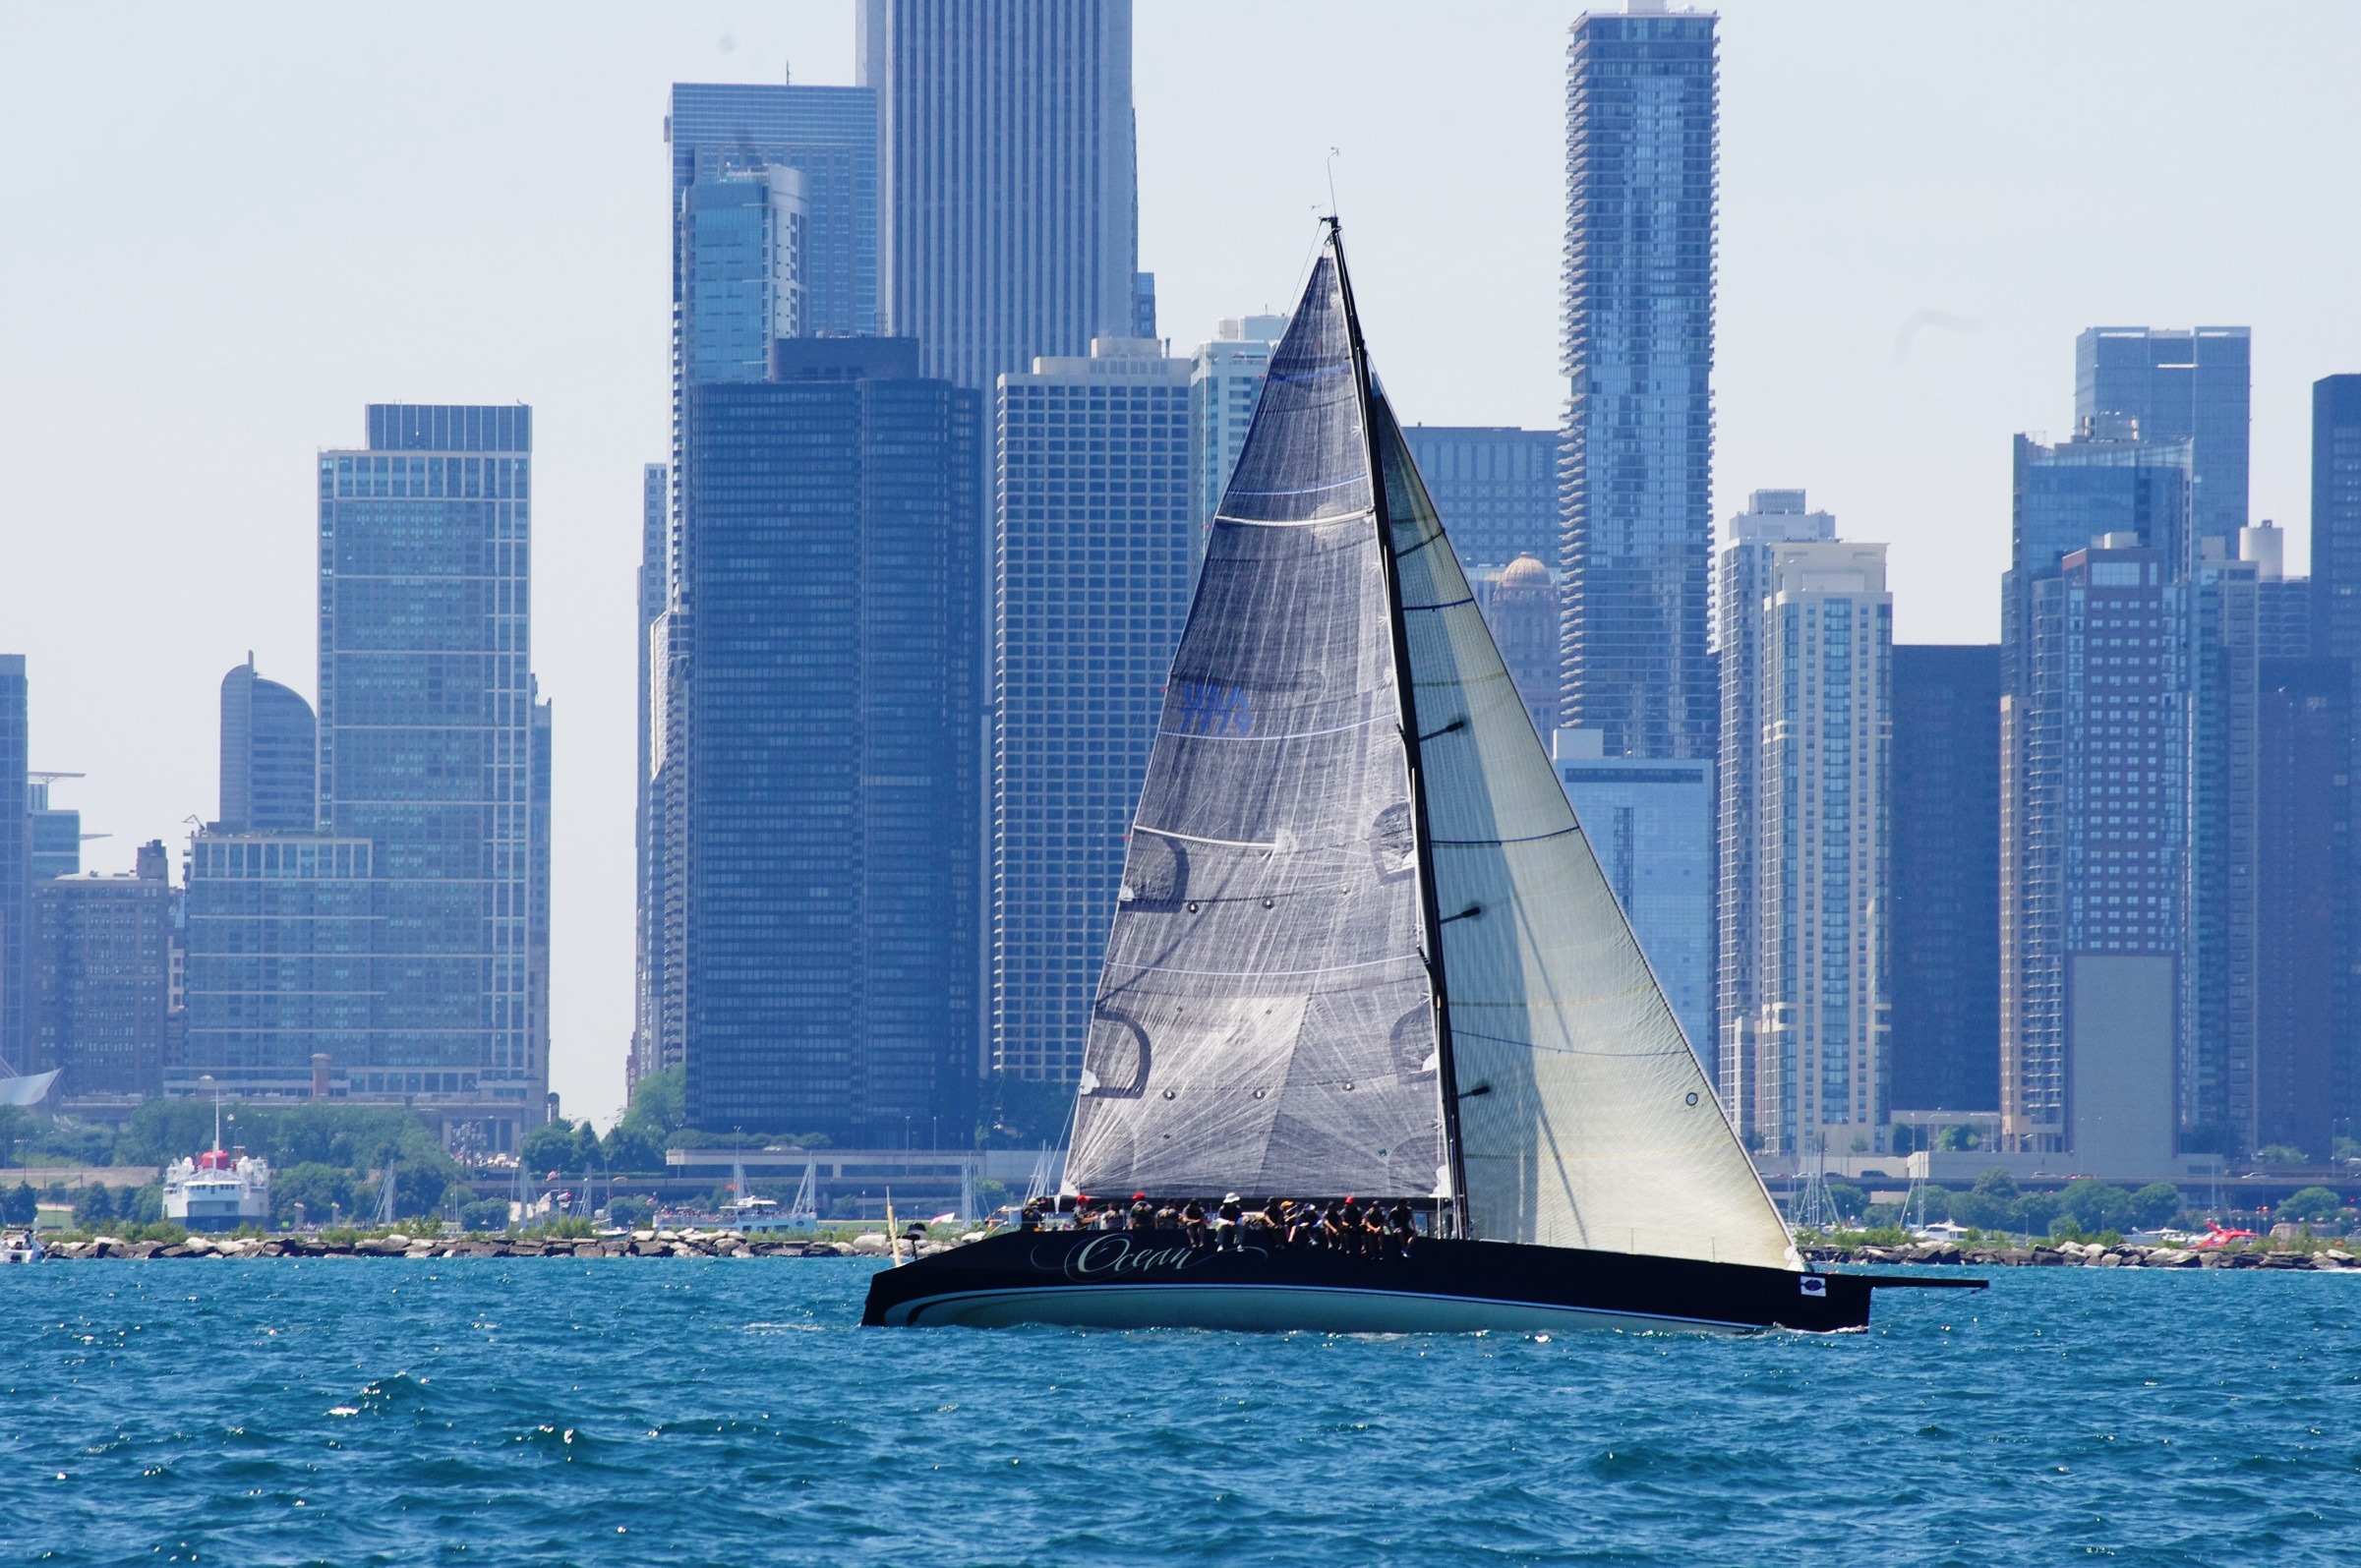 The Yacht OCEAN Along Chicago's Lakefront